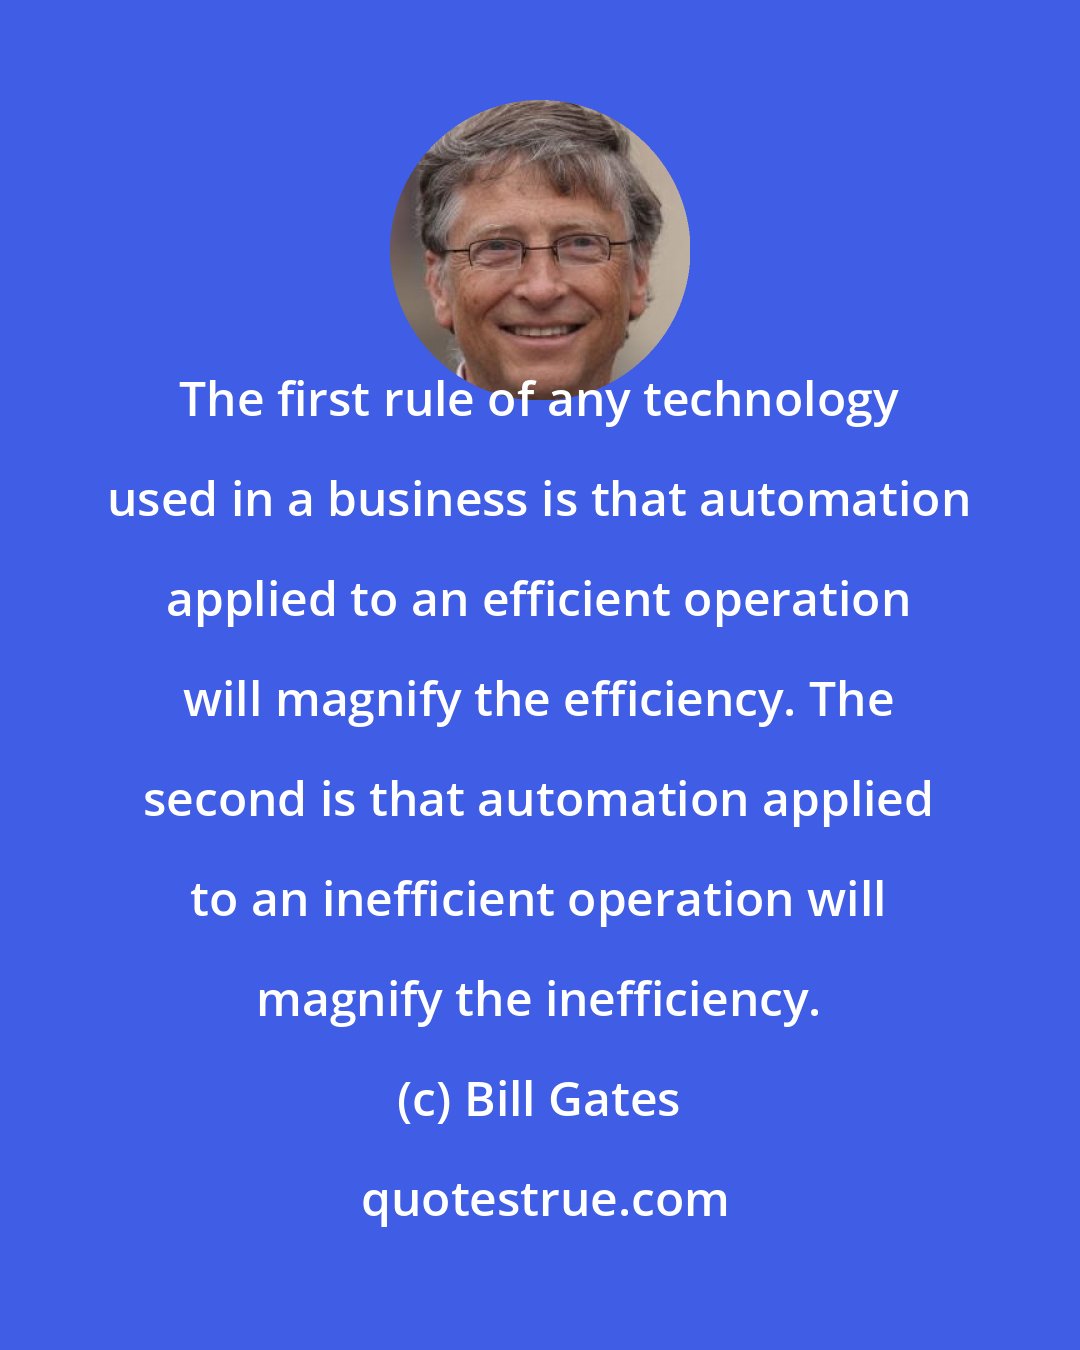 Bill Gates: The first rule of any technology used in a business is that automation applied to an efficient operation will magnify the efficiency. The second is that automation applied to an inefficient operation will magnify the inefficiency.